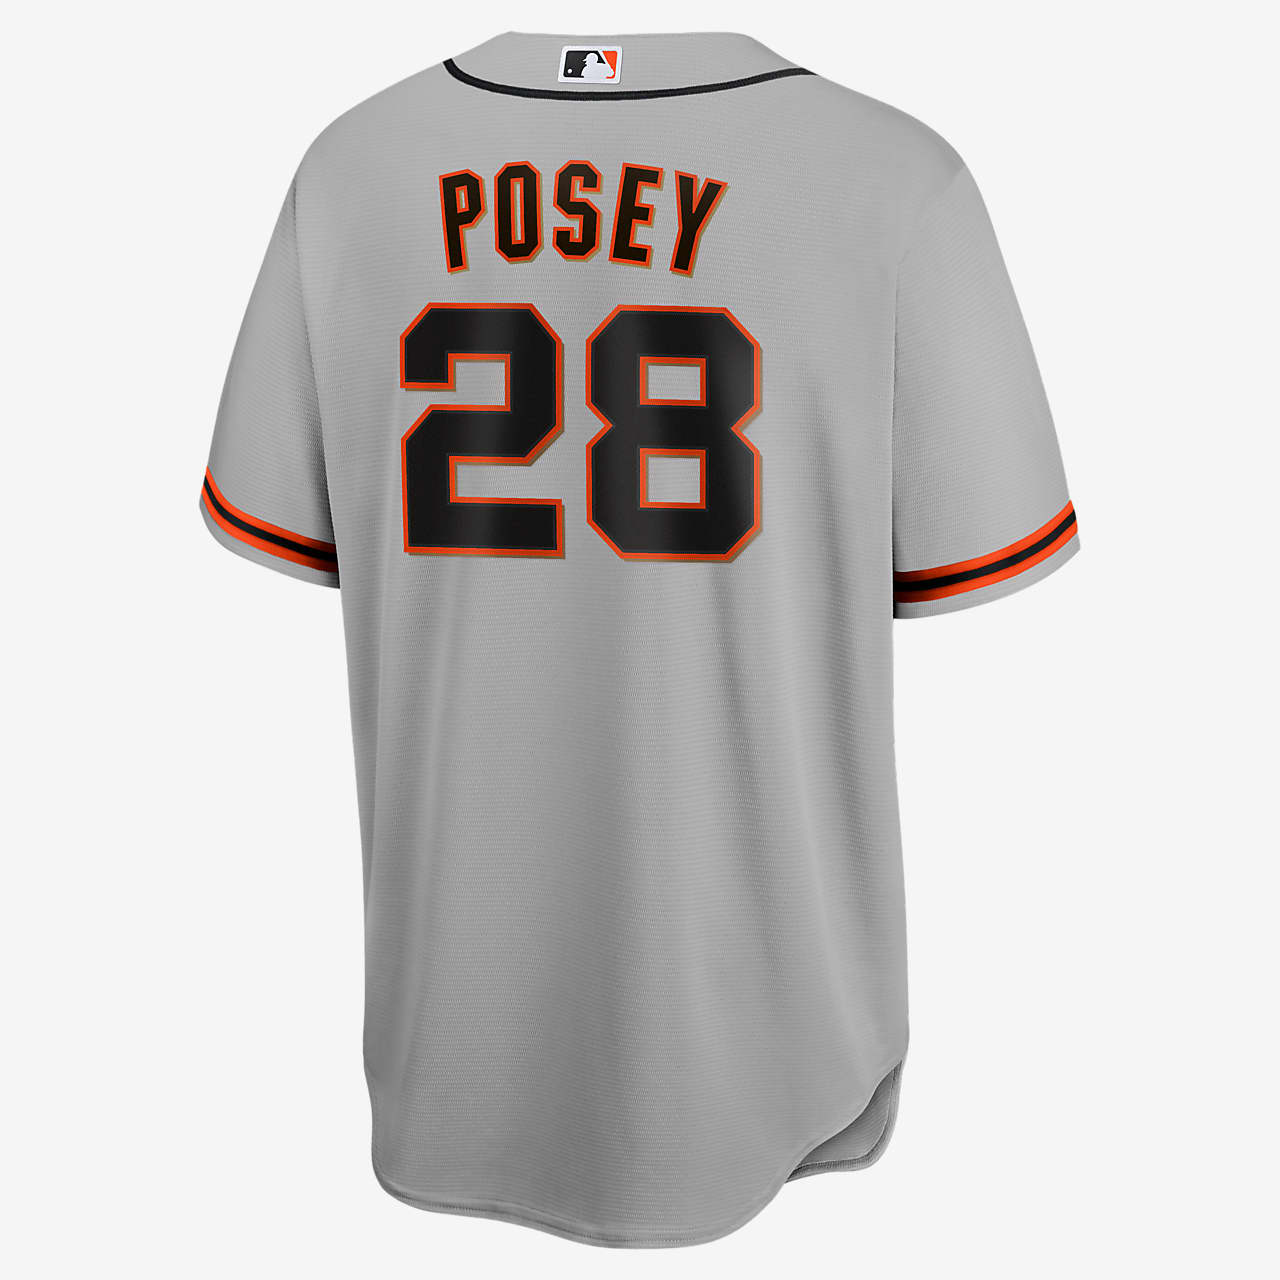 Buster Posey Jersey Online, SAVE 47% 